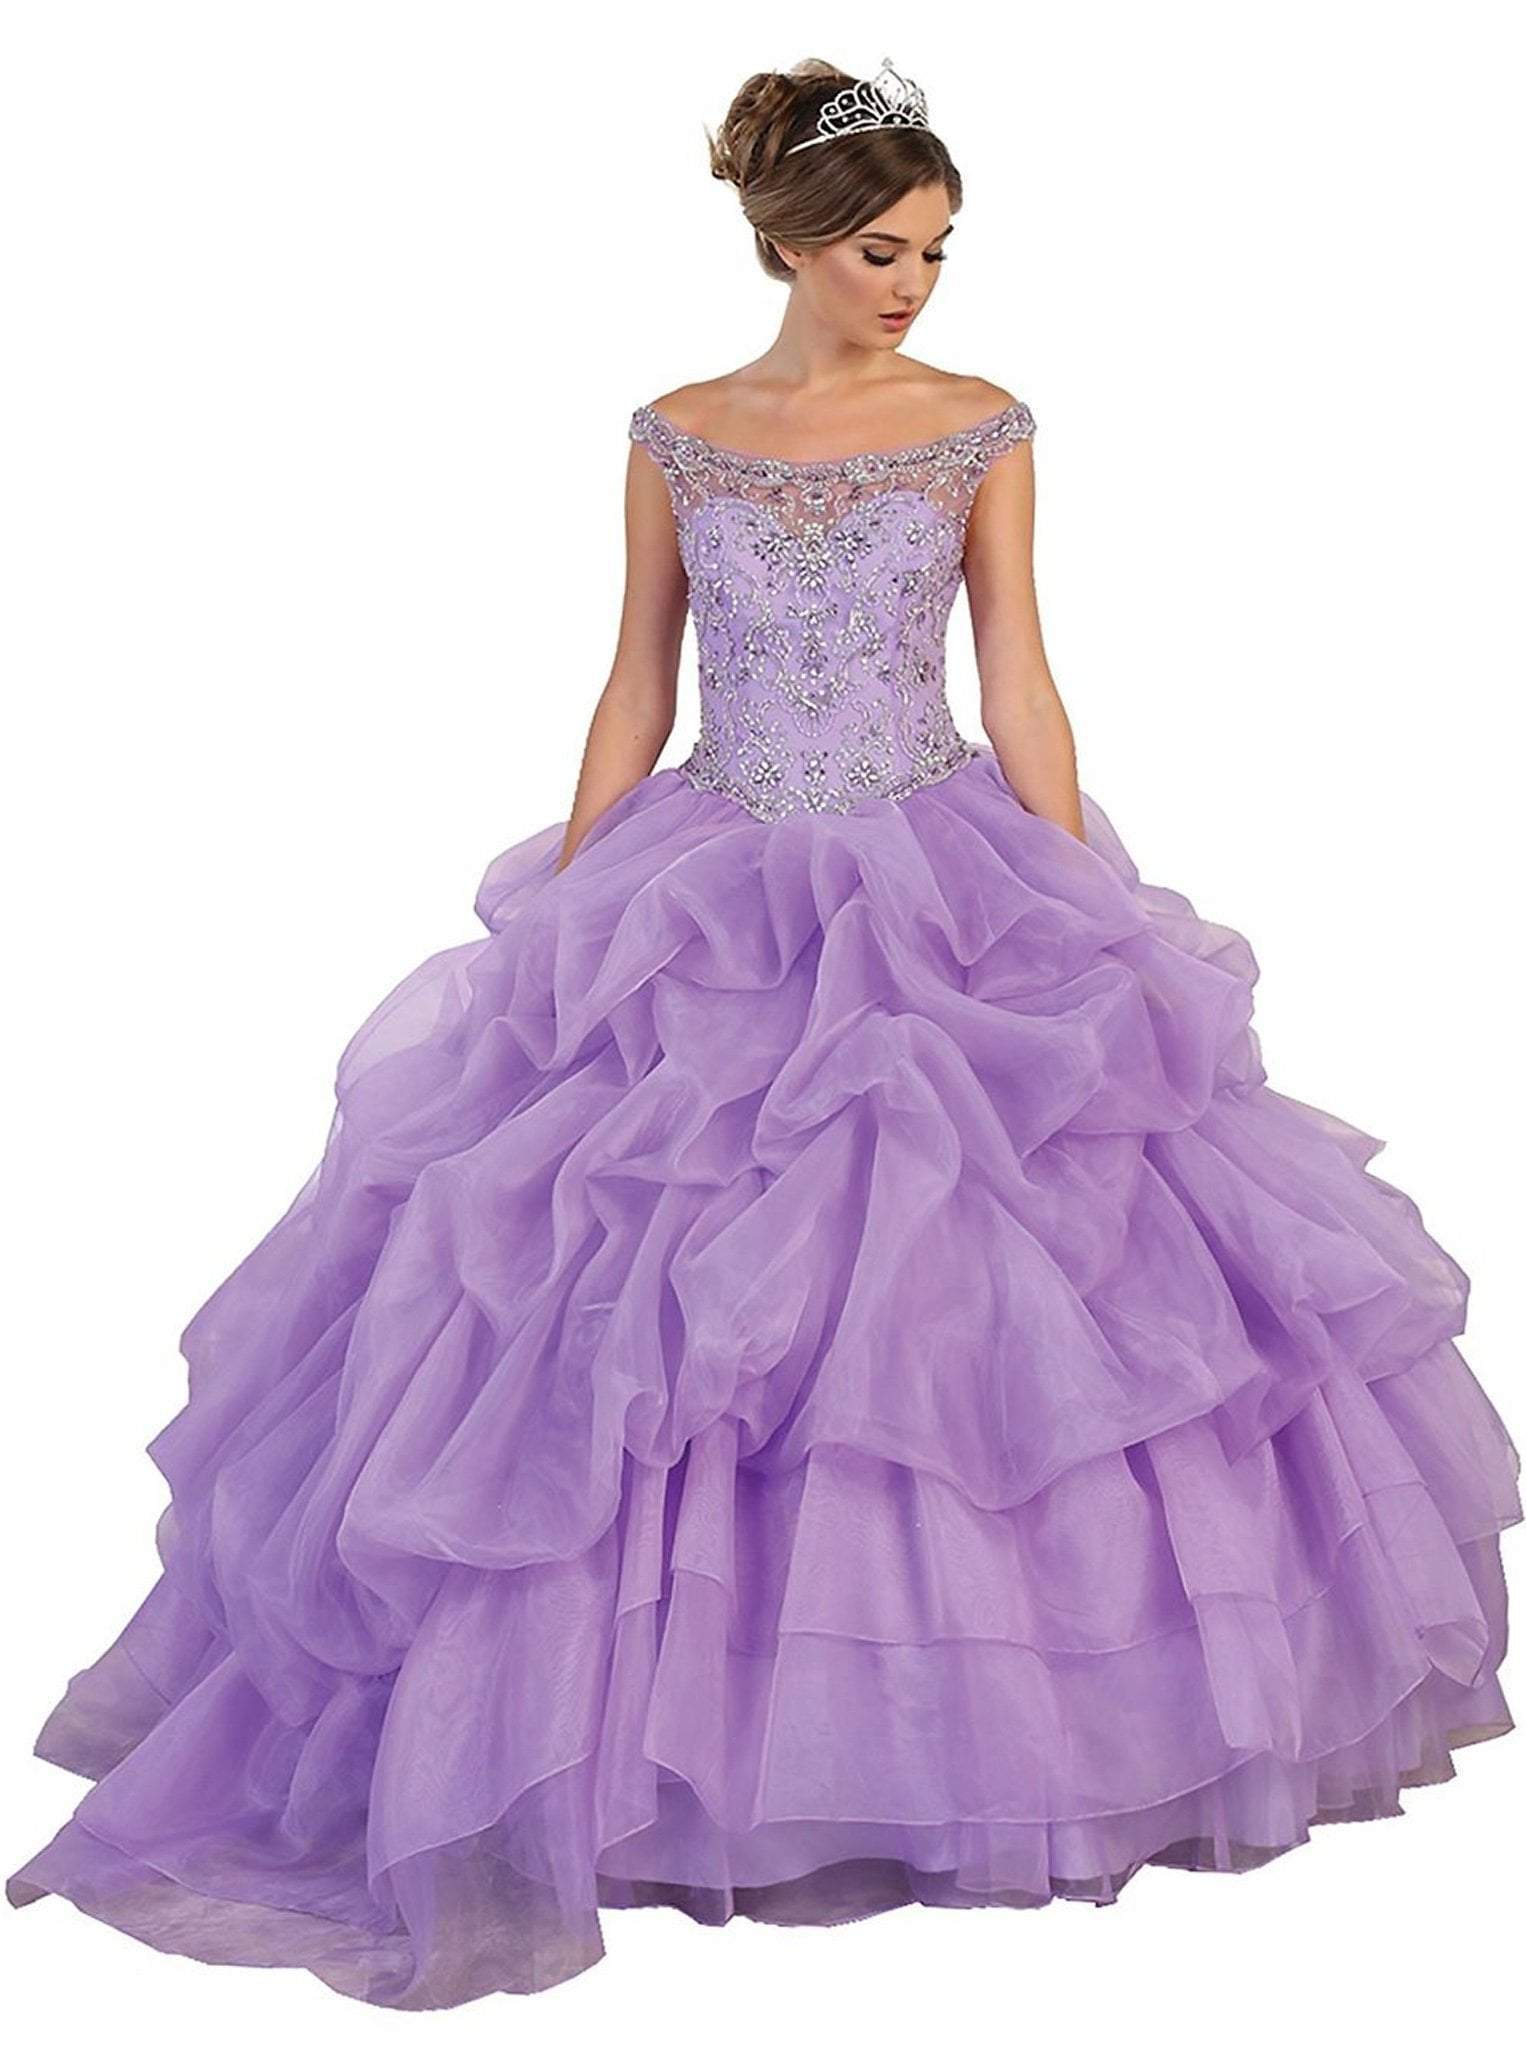 May Queen - Embellished Illusion Off-Shoulder Ruffled Quinceanera Ballgown
